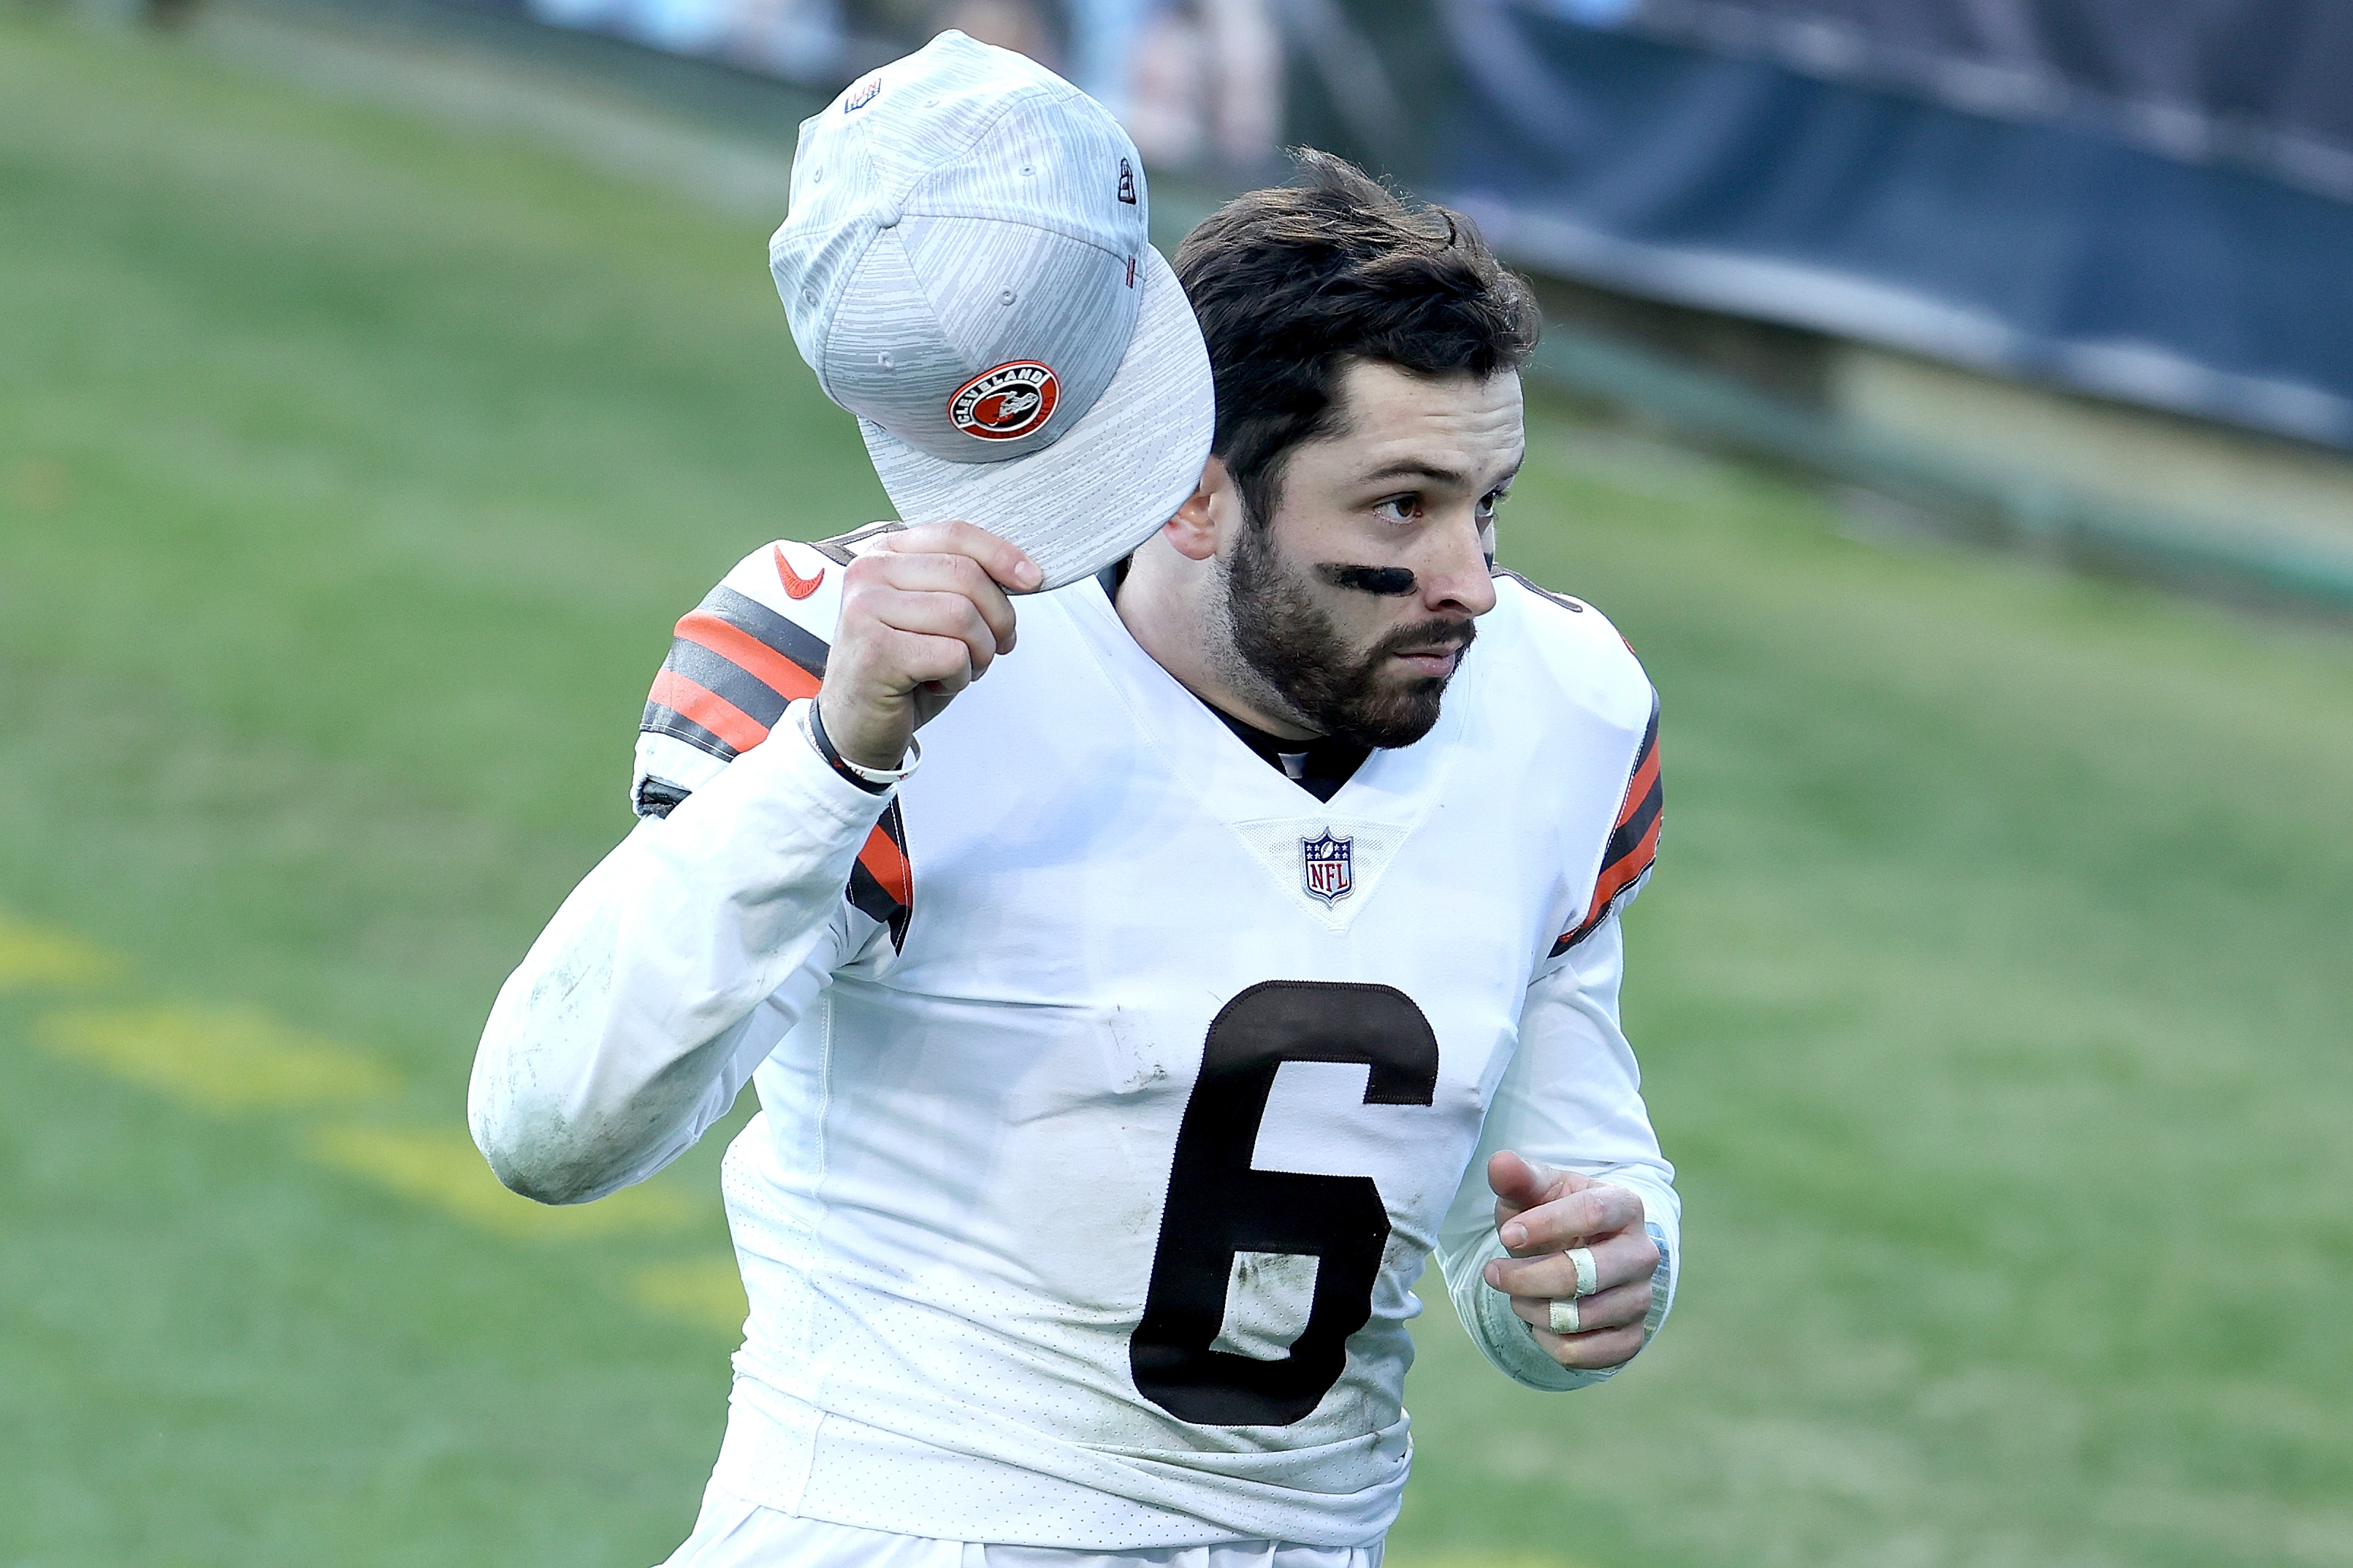 Is Baker Mayfield's first name really Baker?